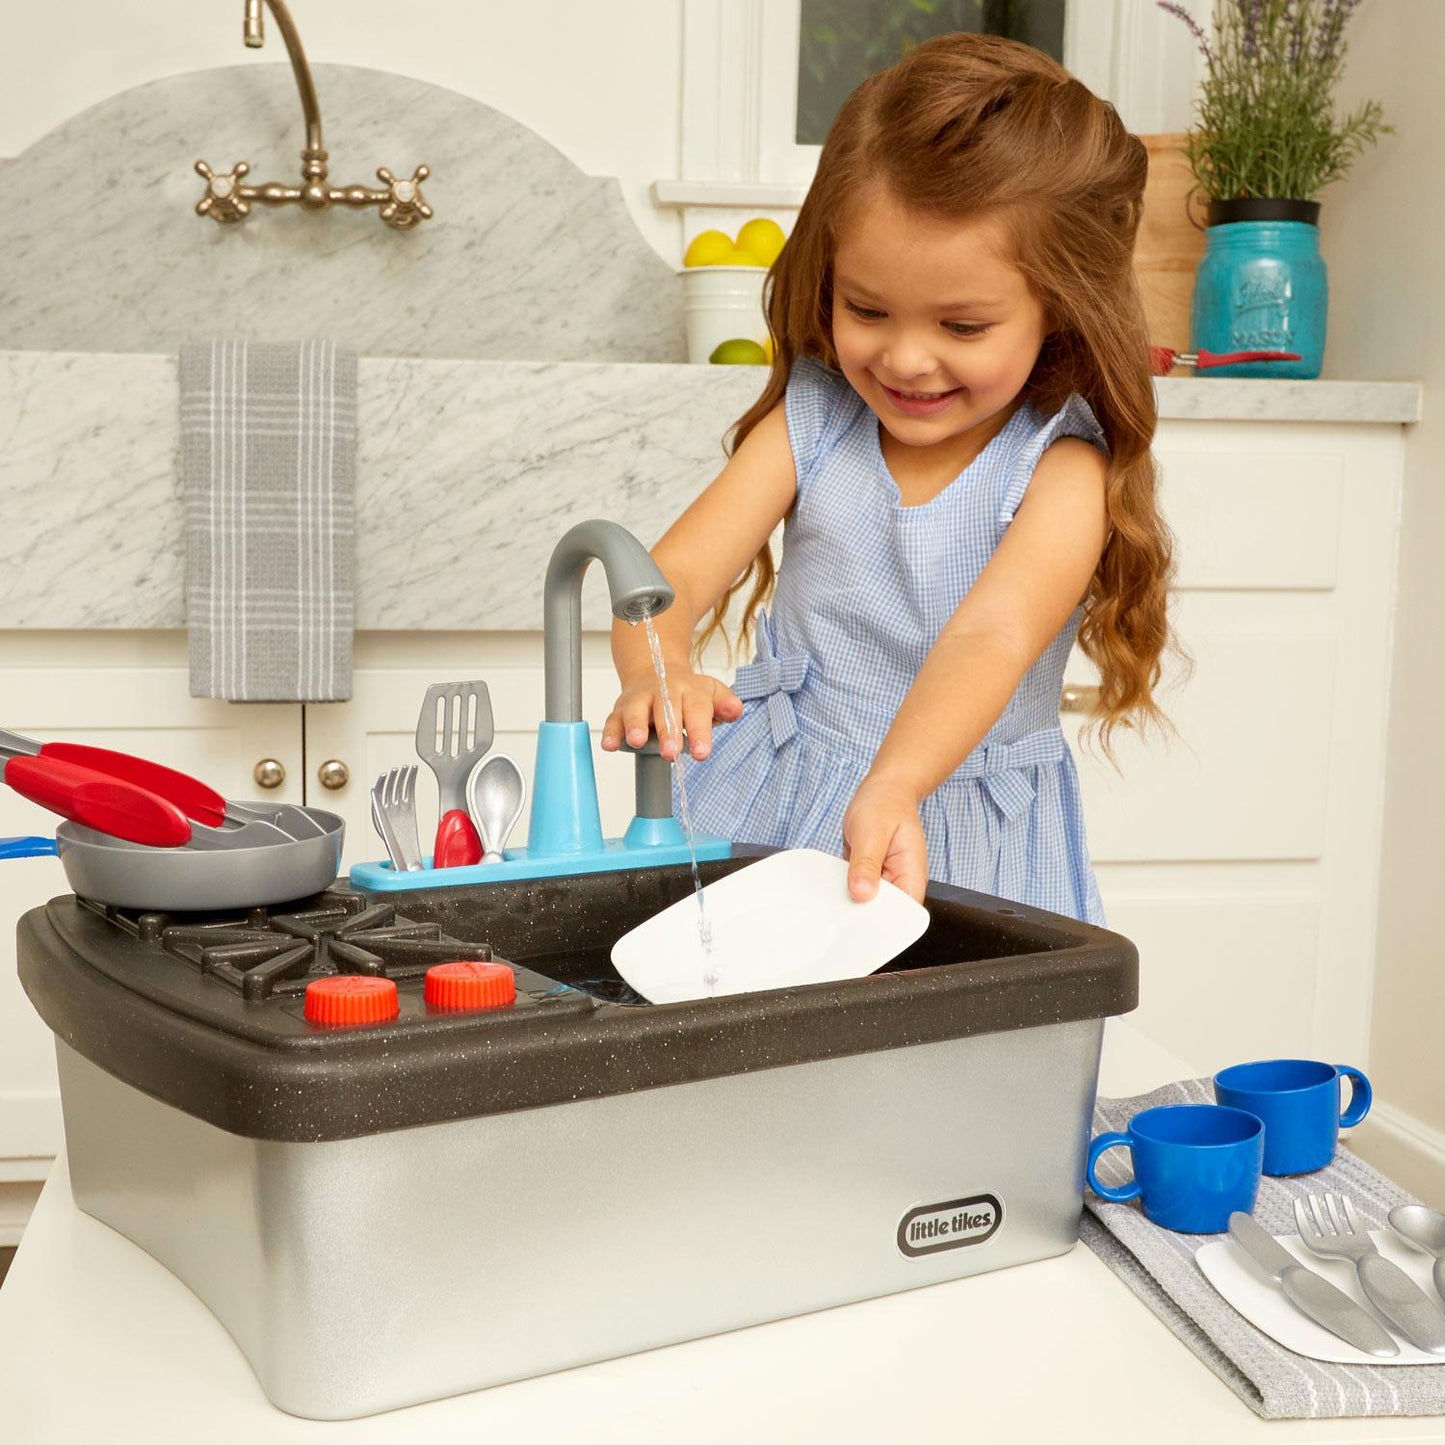 Little Tikes First Sink & Stove